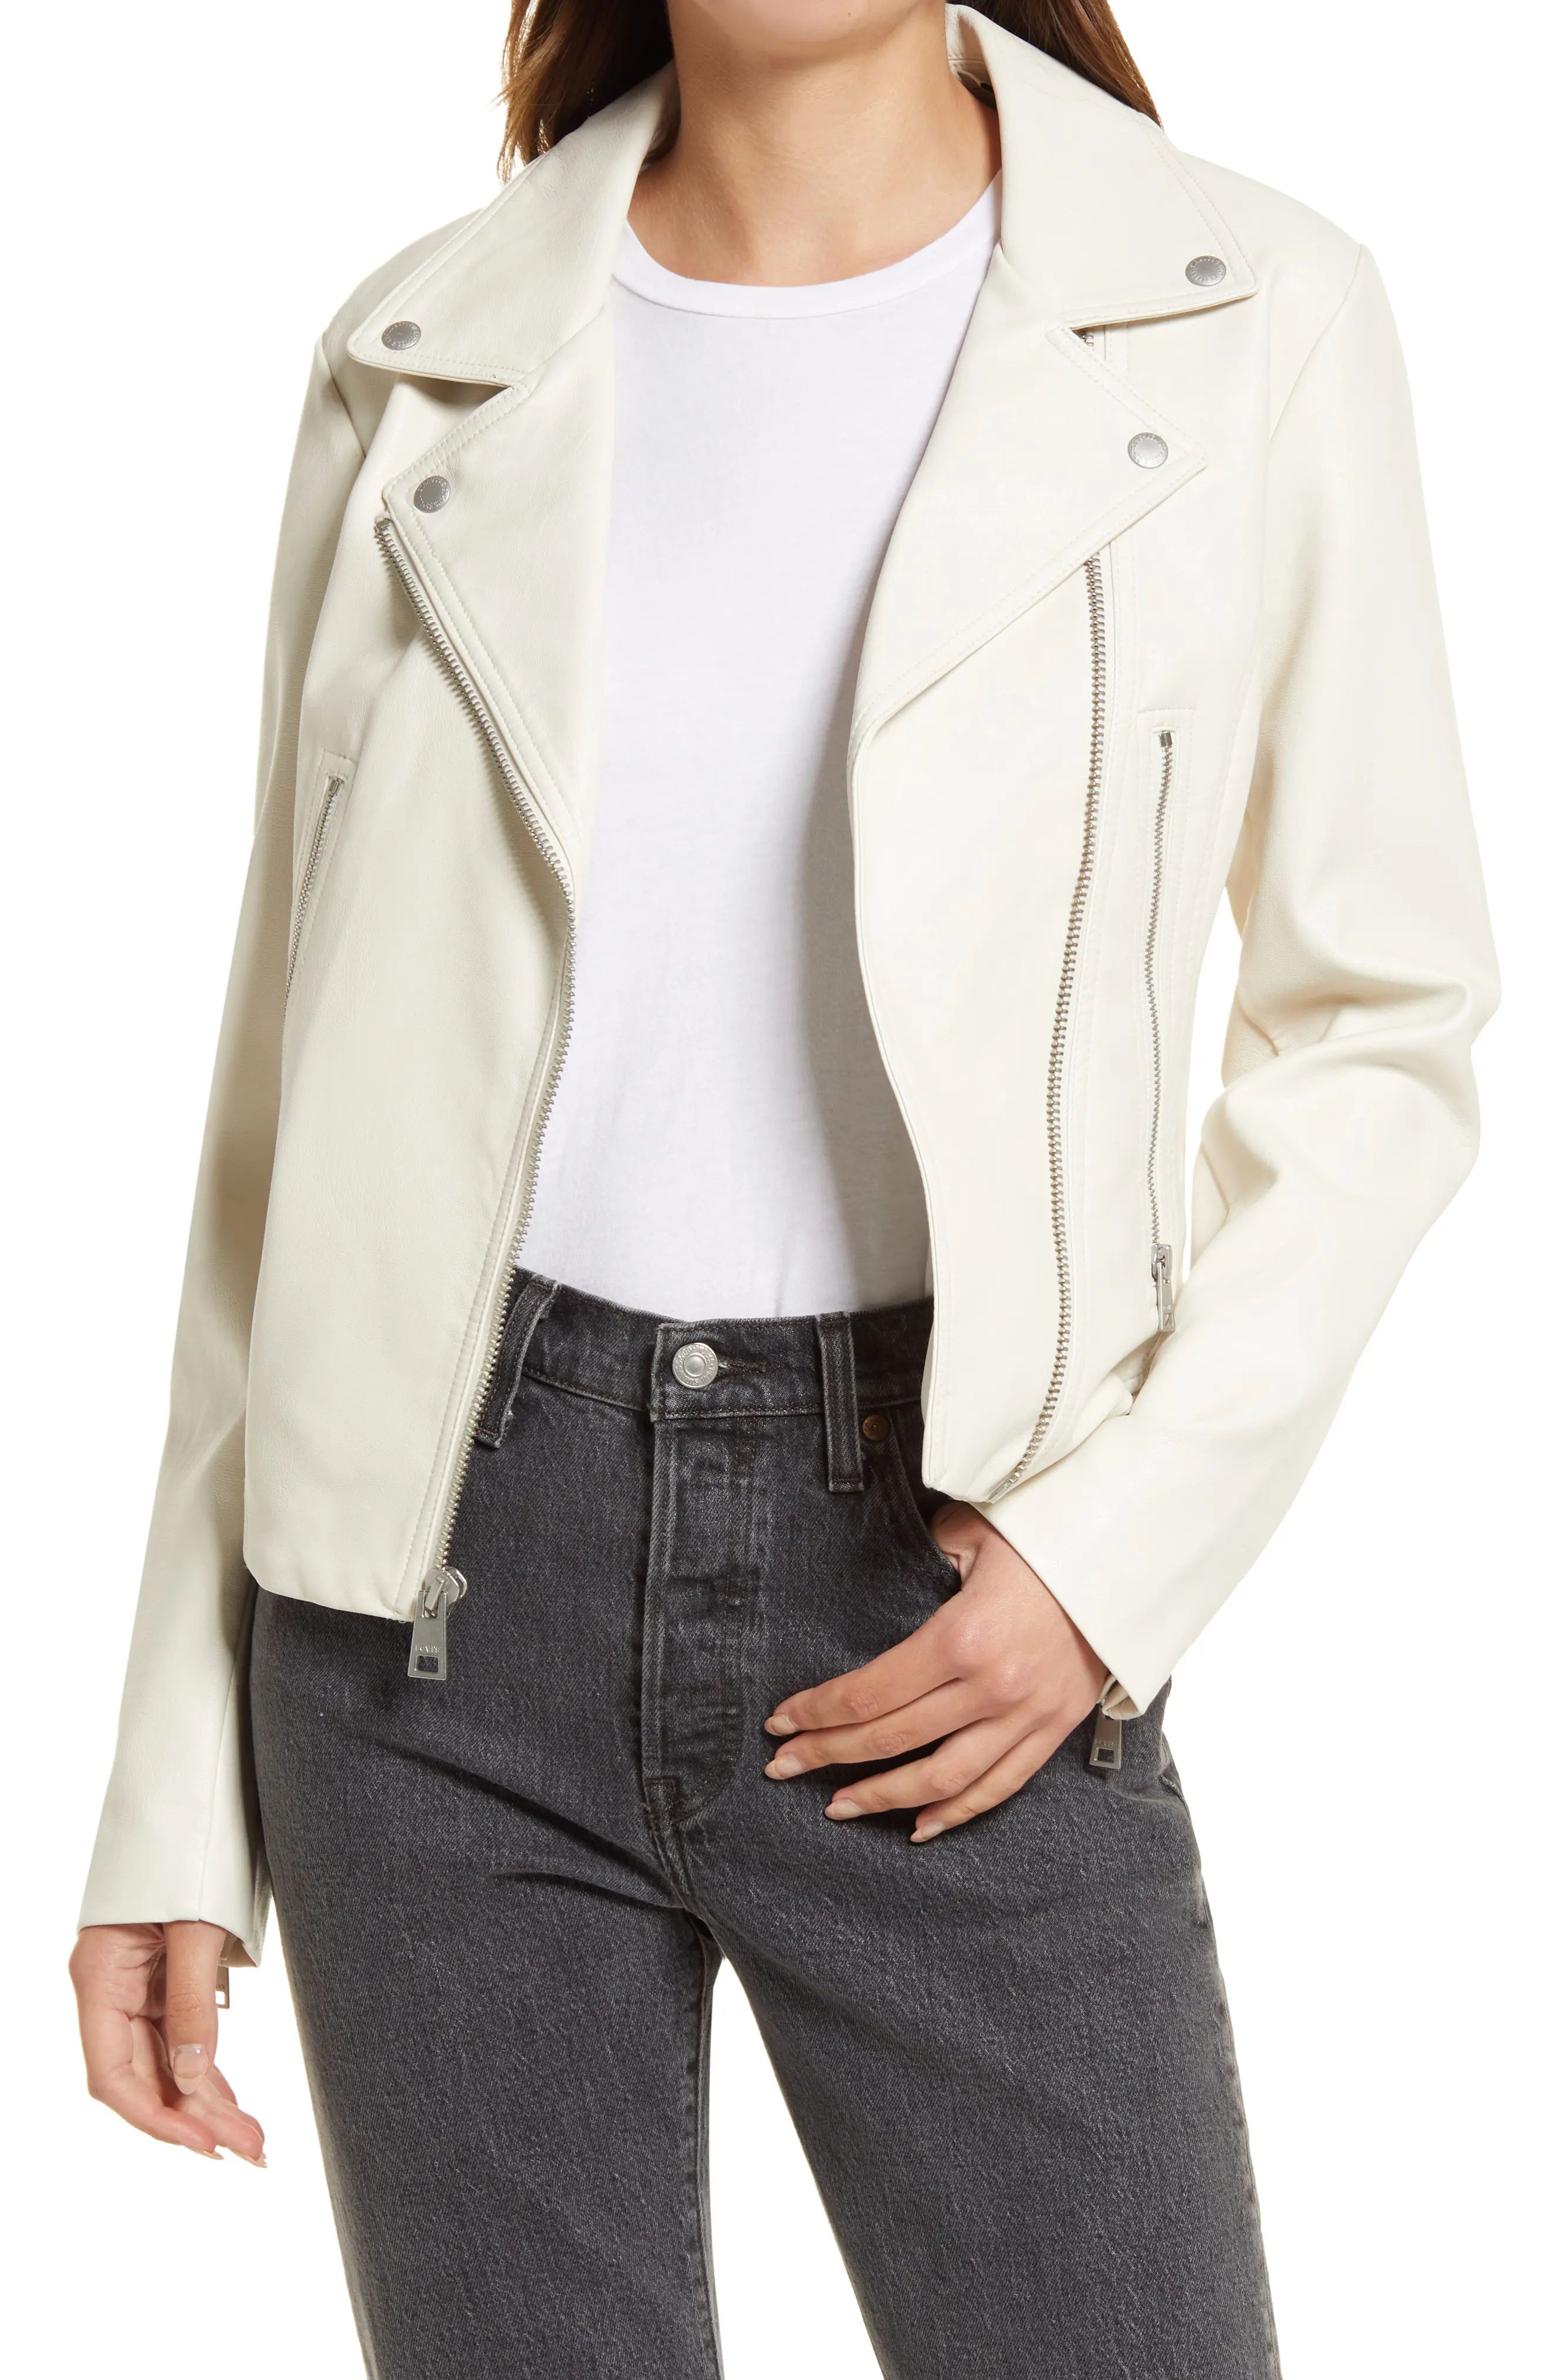 levi's Women's Faux Leather Moto Jacket in Oyster at Nordstrom, Size Small | Nordstrom